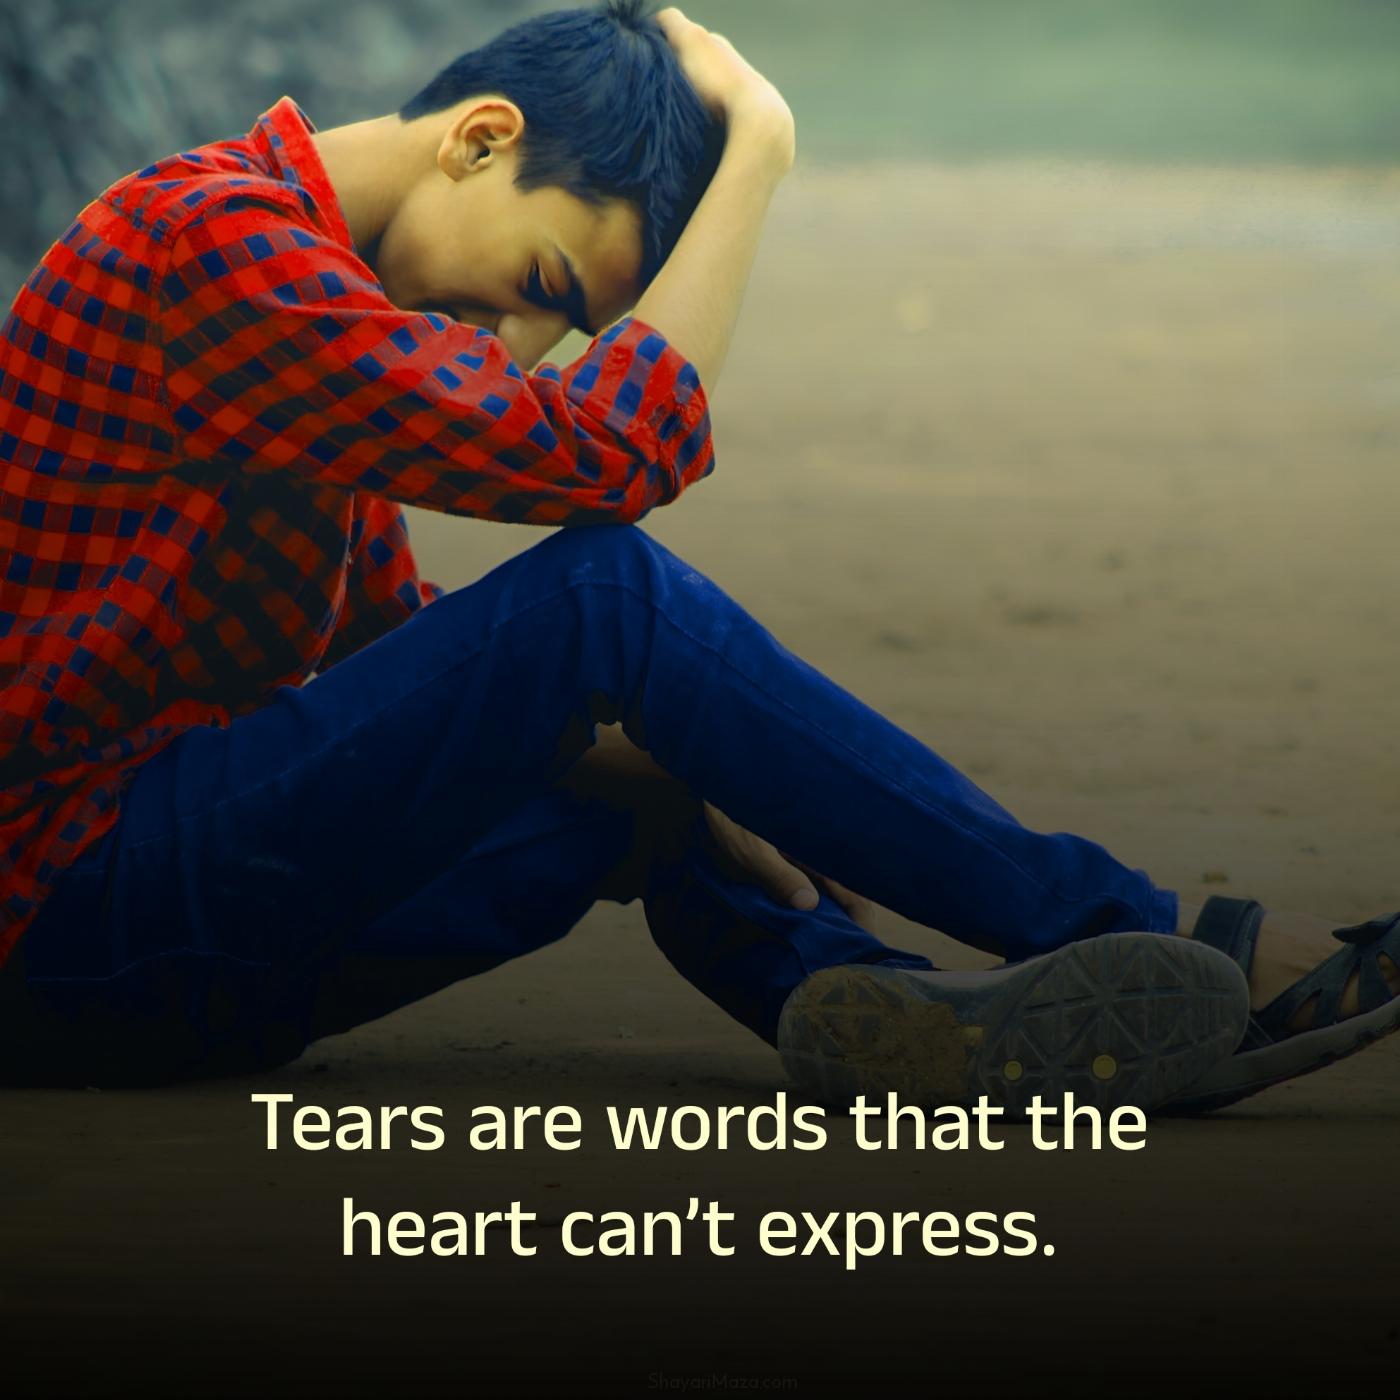 Tears are words that the heart cant express